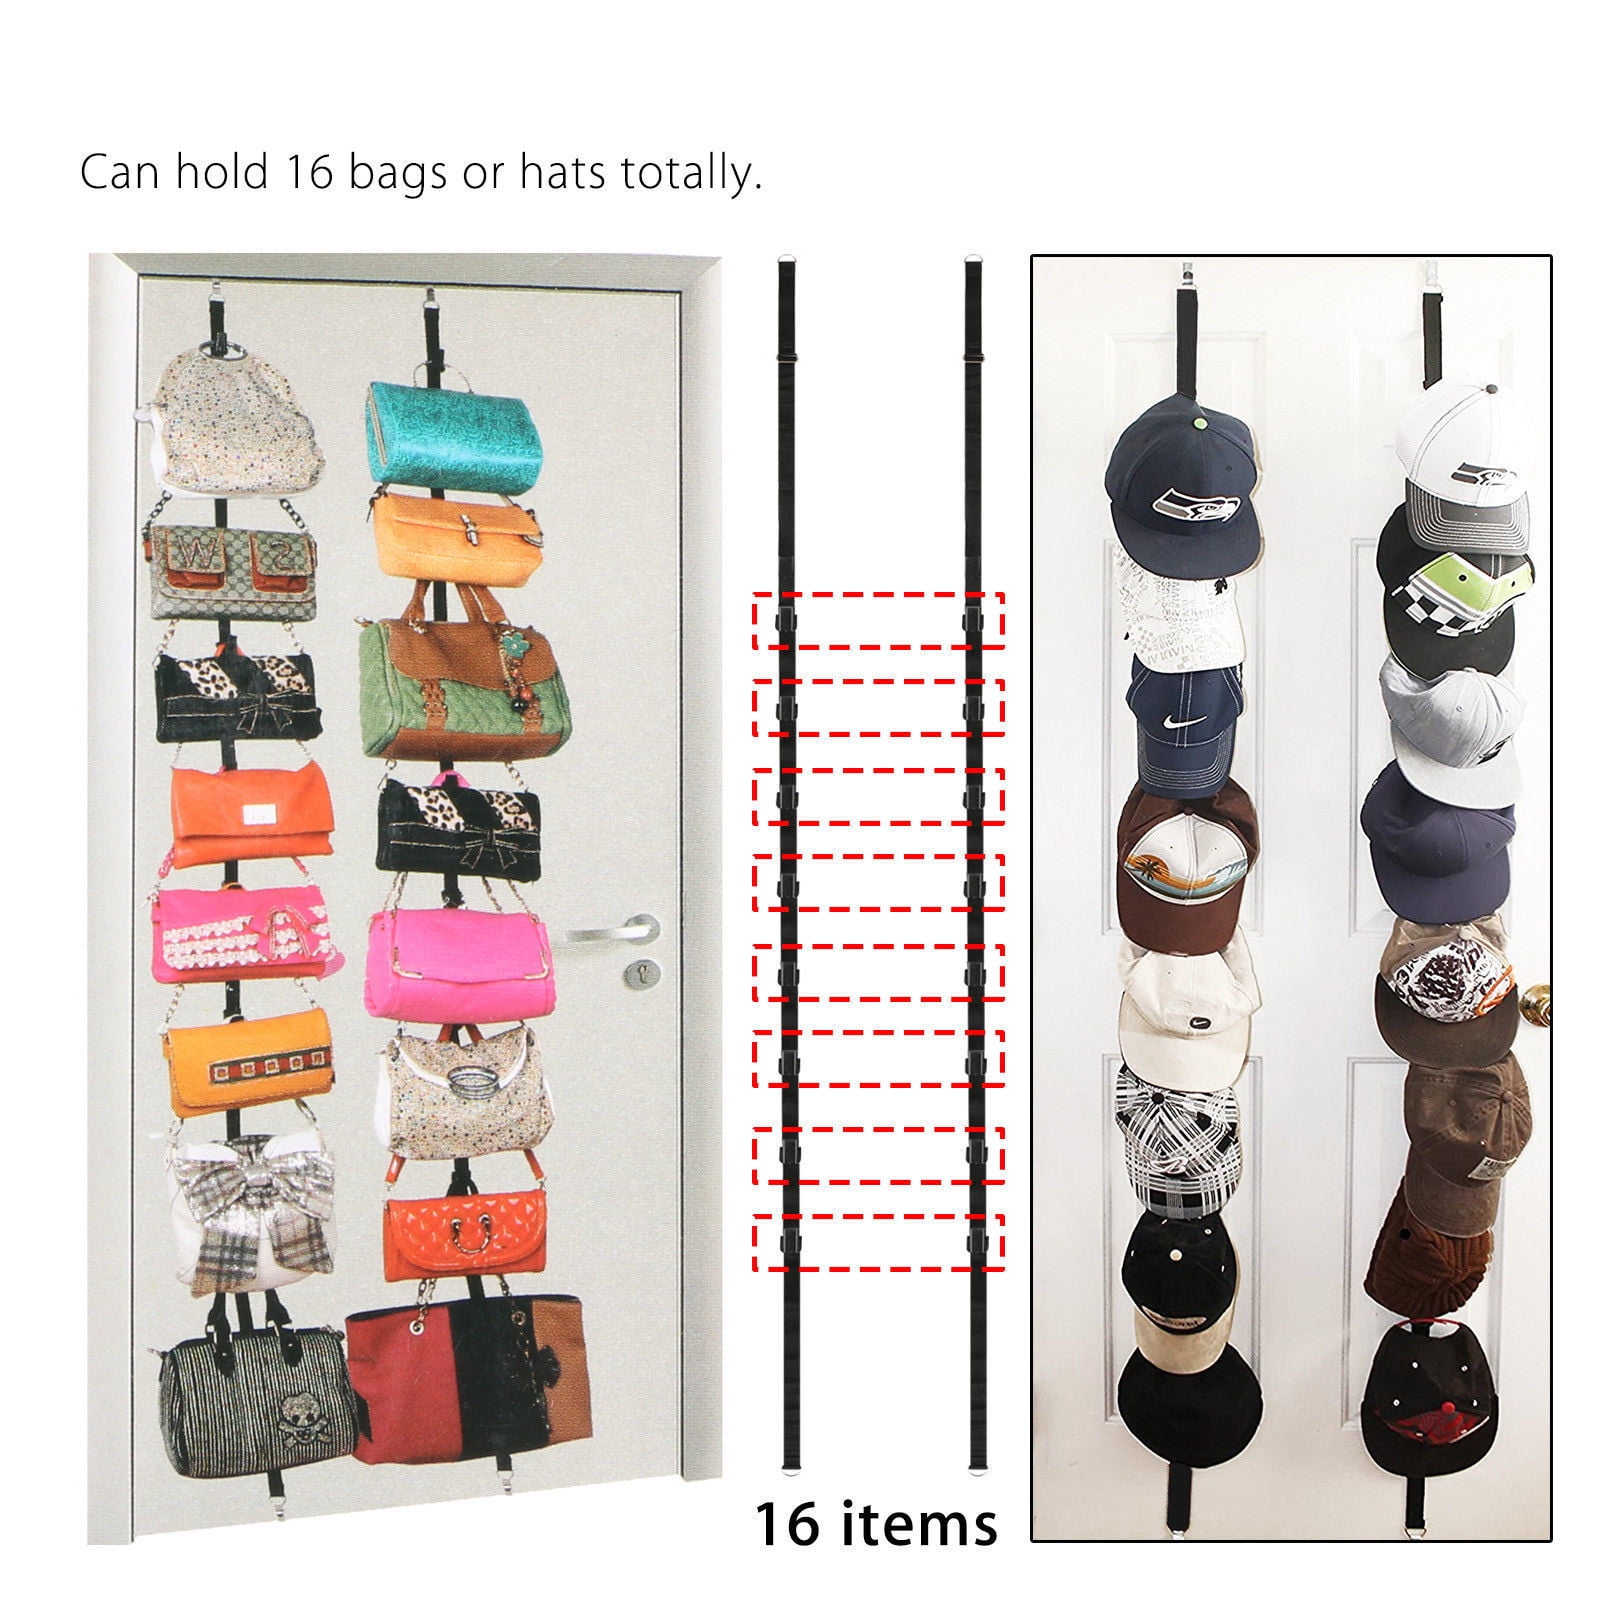 Baseball Cap Holder,Change Your Ordinary Hanger to Cap Organizer Hanger,Hat Organizers Suitable All Types Hats（Black and Dark Coffee Color） Hat Holder TUPARKA 2 Set Cap Organizer Hanger 